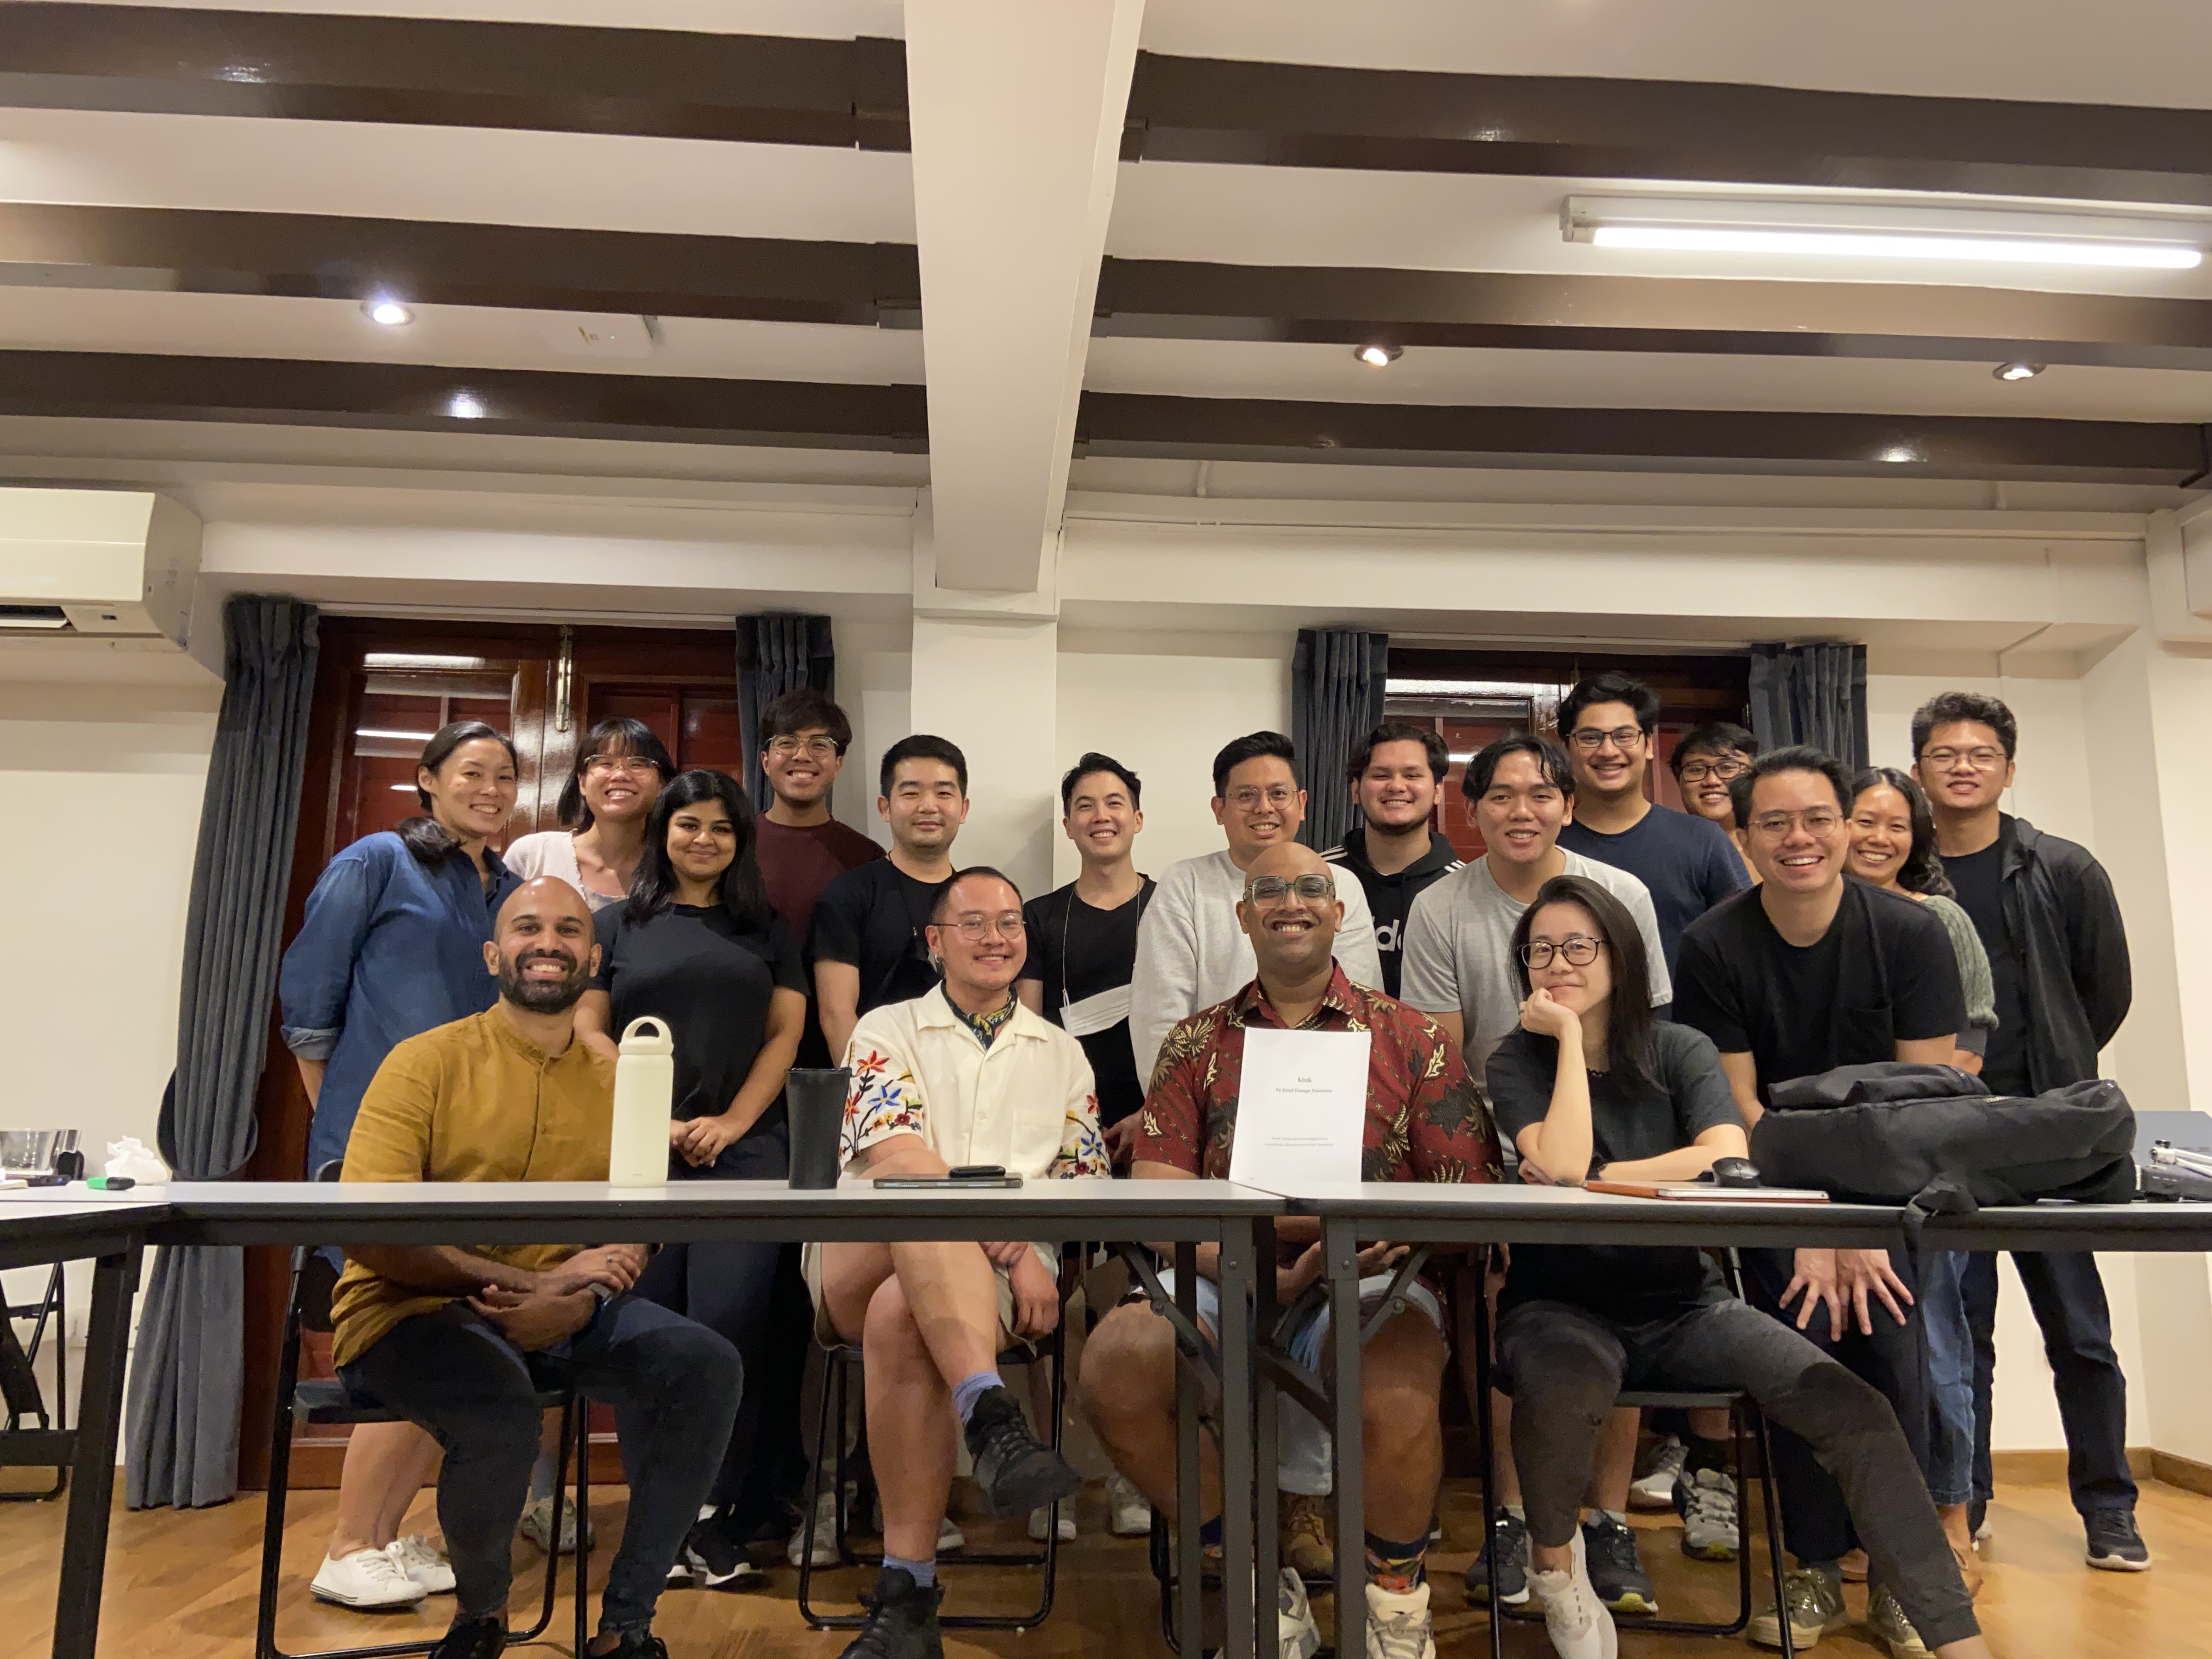 Photo with the table-read group. From L-R: (Row 1) Shridar, Joel, Jaryl and Michelle (Row 2) Yanling, Jaclyn, Menaka, Danial, Thomas, Shou Chen, Adeeb, Chris, Marwyn, Rohan, Riqi, Lucas, Juliet and Eugene.